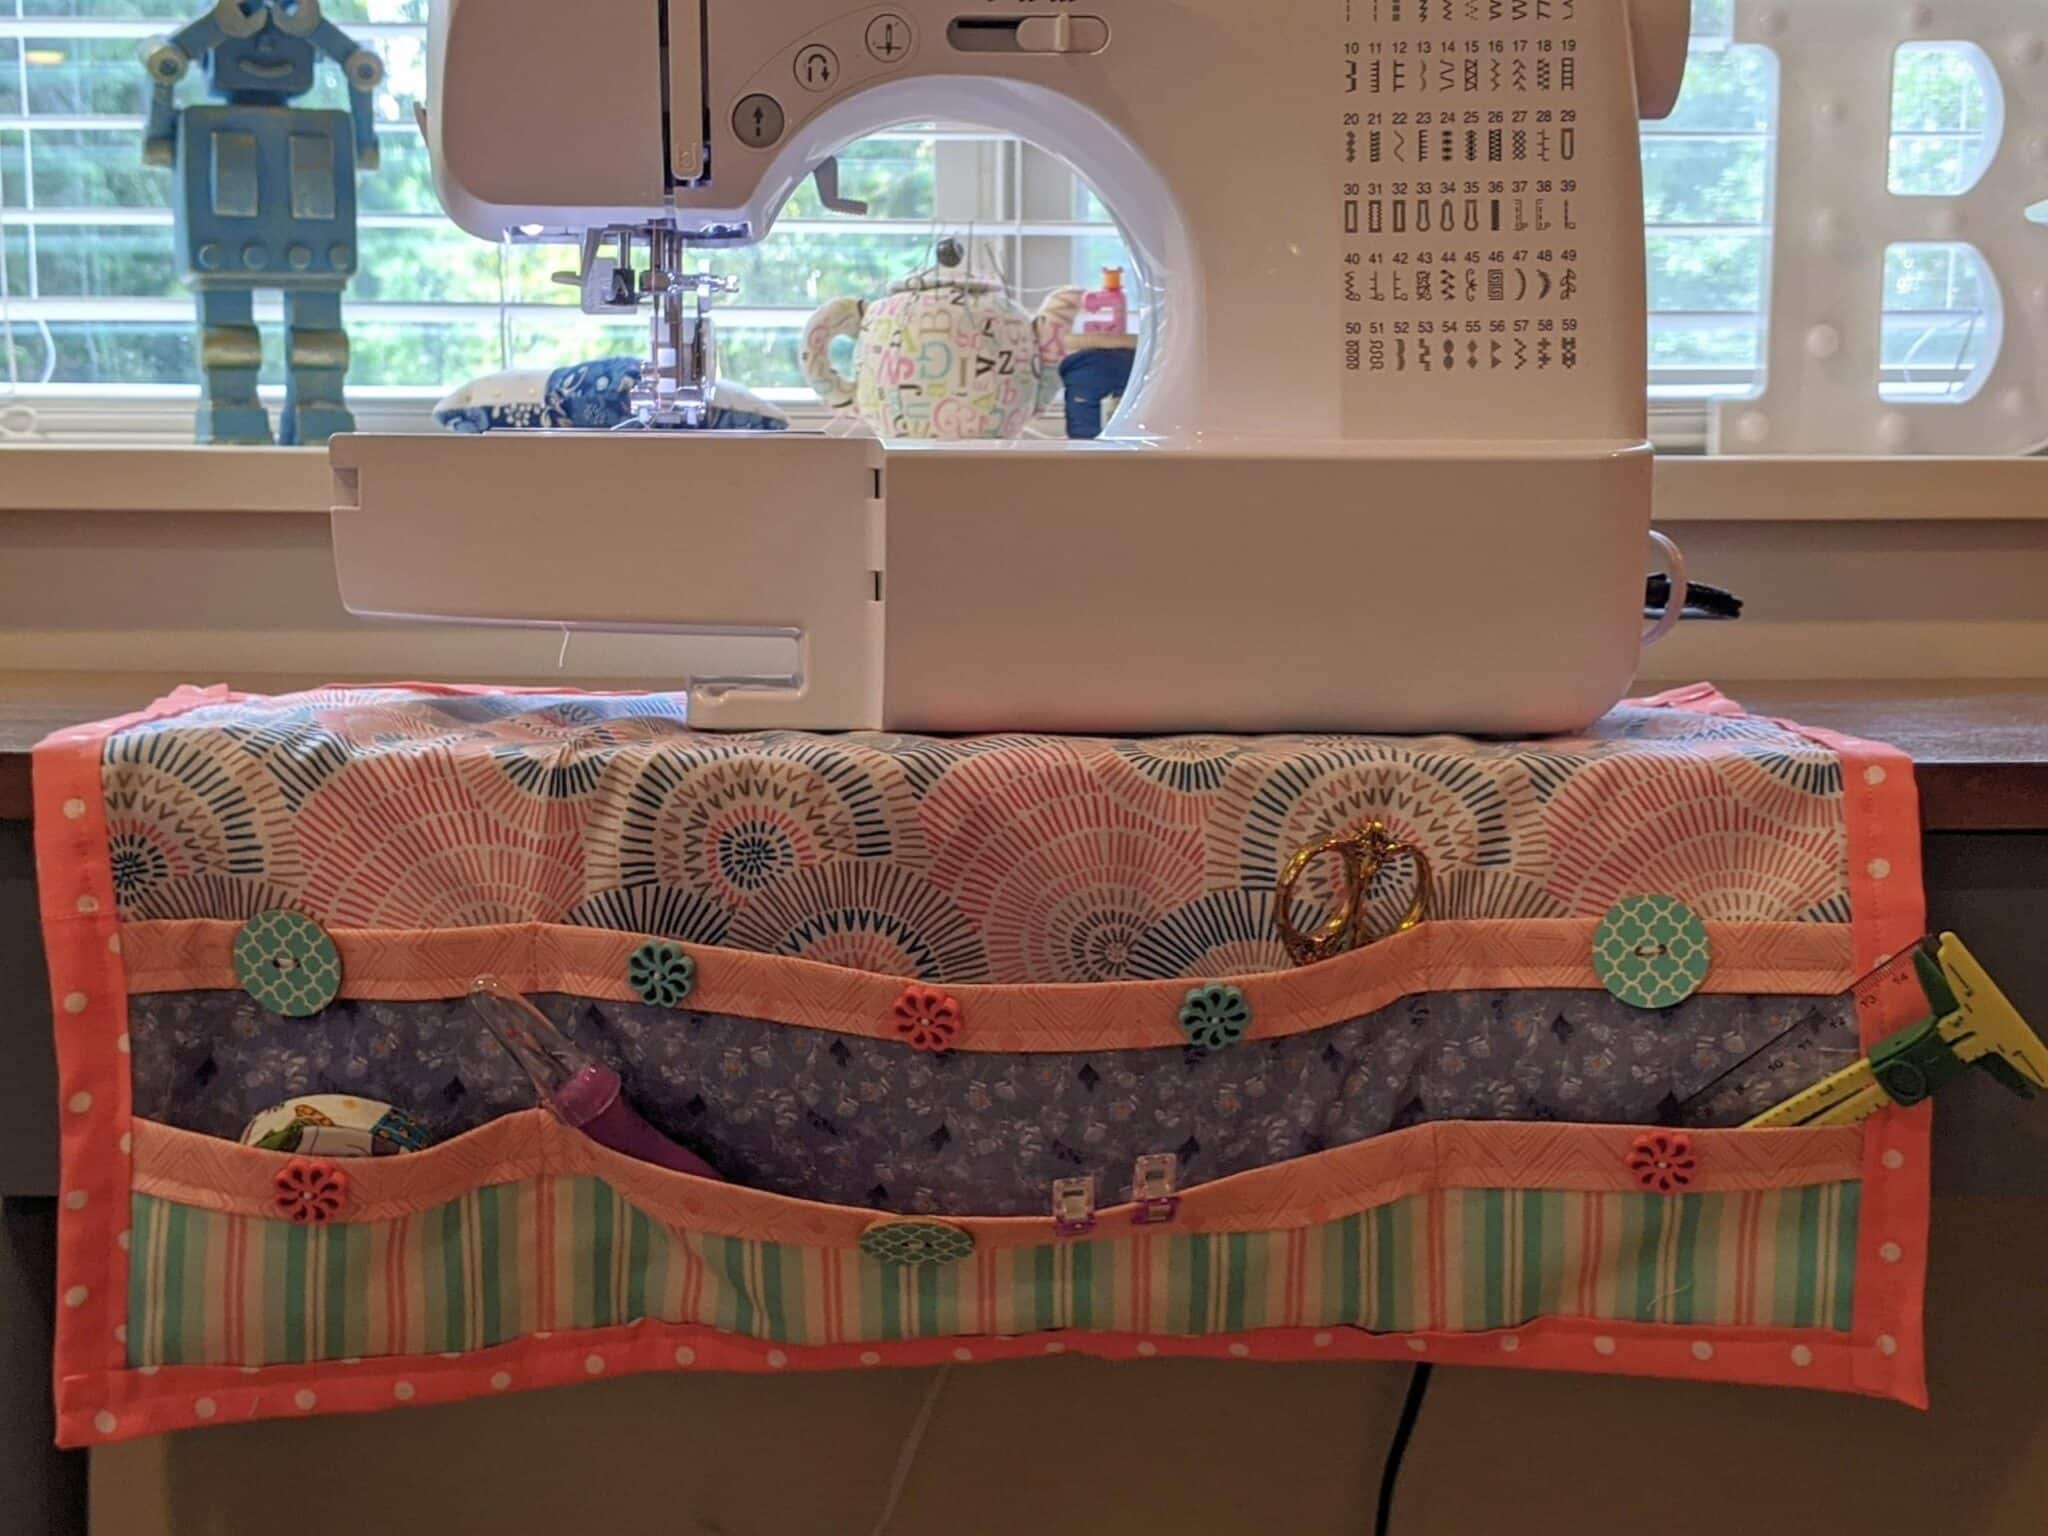 Sewing Room Organization Pt 2: Sewing Machine Mat - 5 out of 4 Patterns